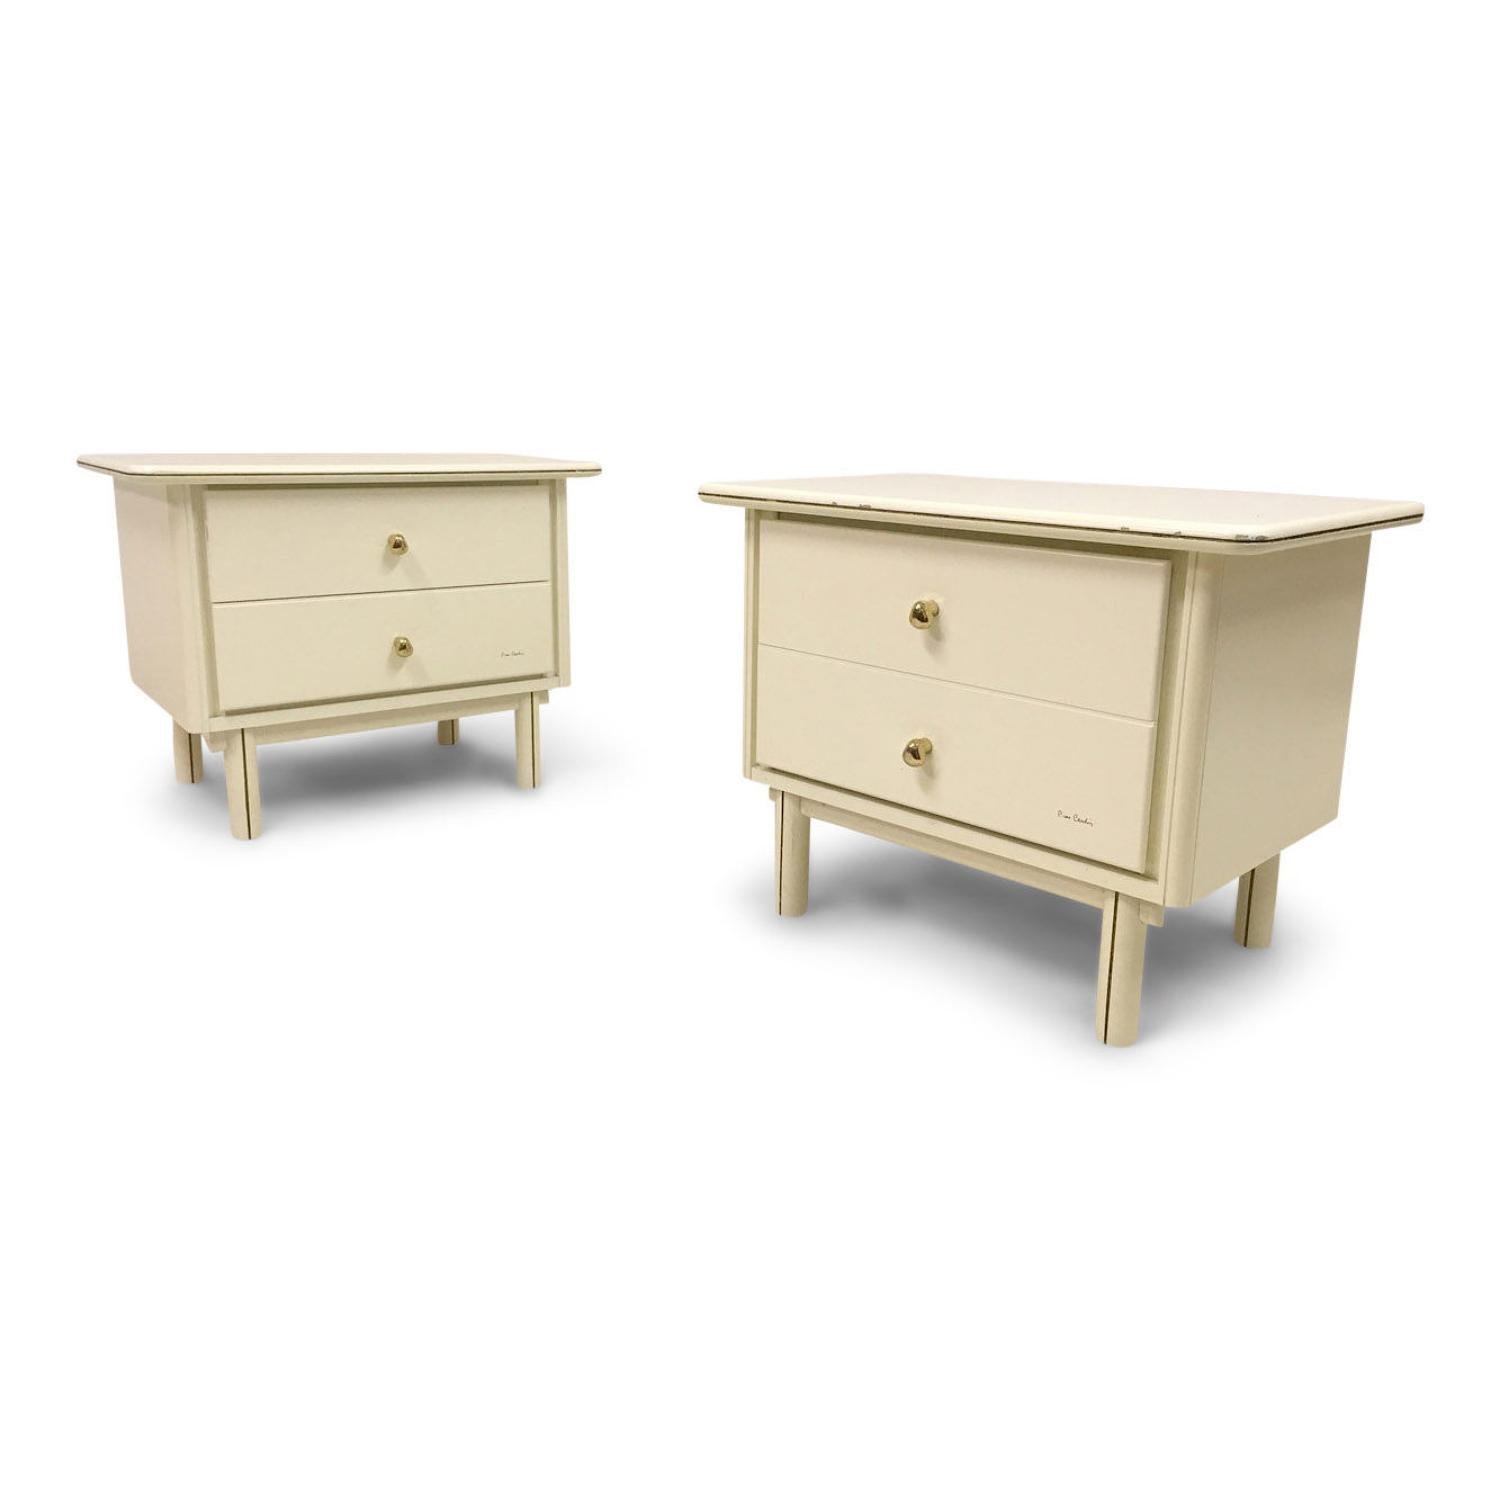 A pair of bedside tables by Pierre Cardin